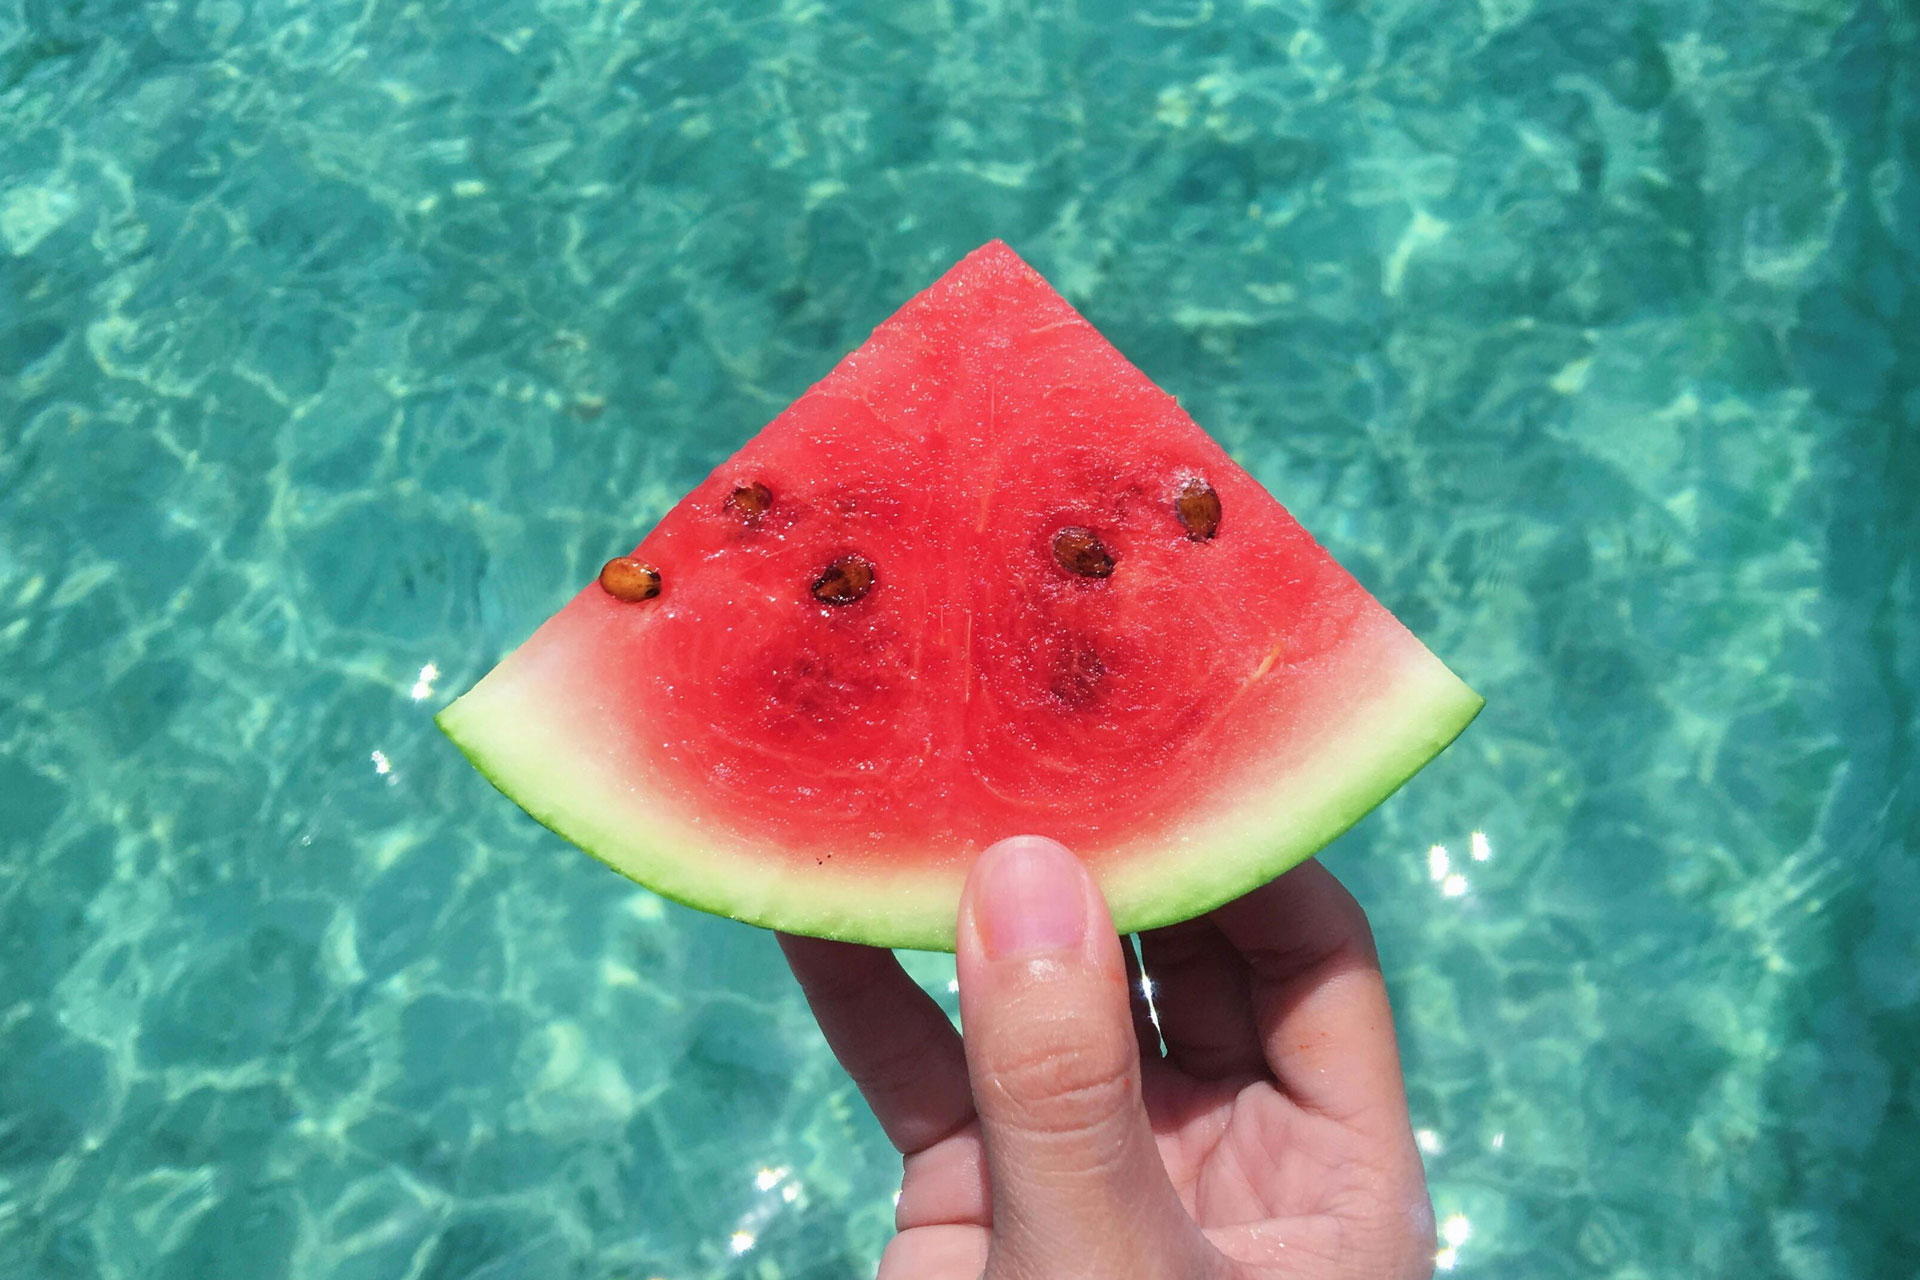 How To Make The Viral Watermelon Sandwich